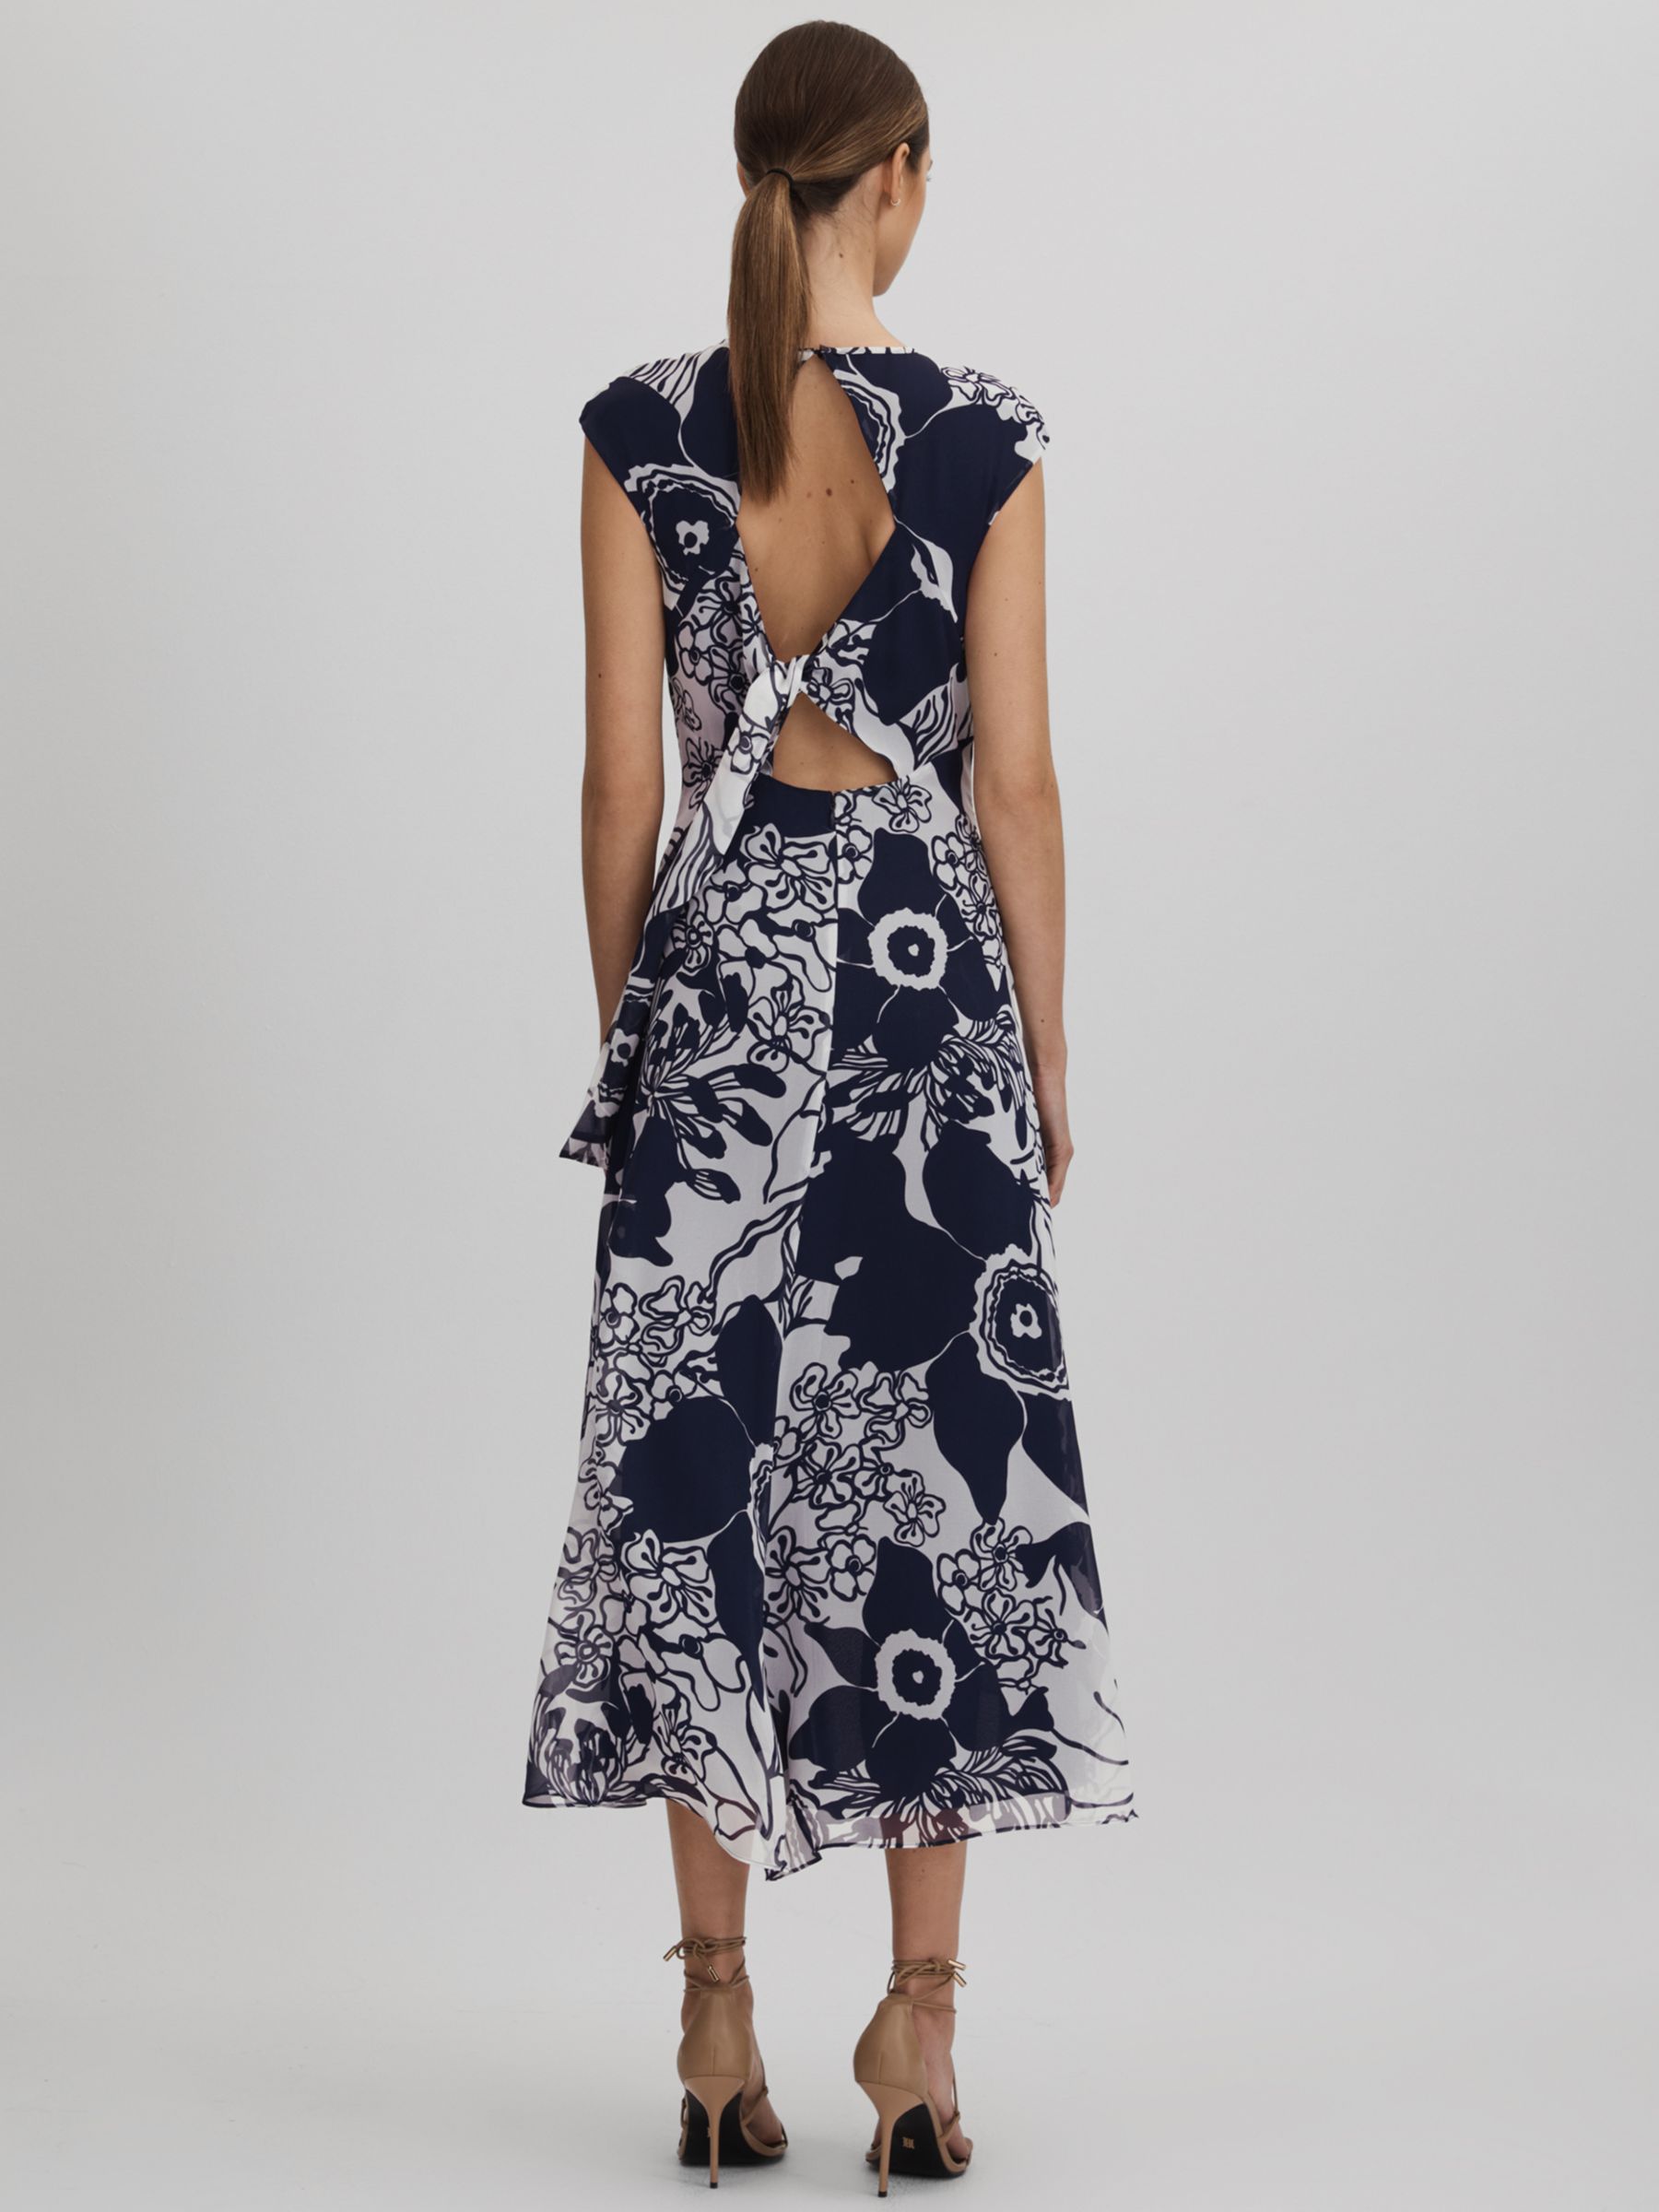 Buy Reiss Becci Abstract Floral Print Midi Dress, Navy/White Online at johnlewis.com